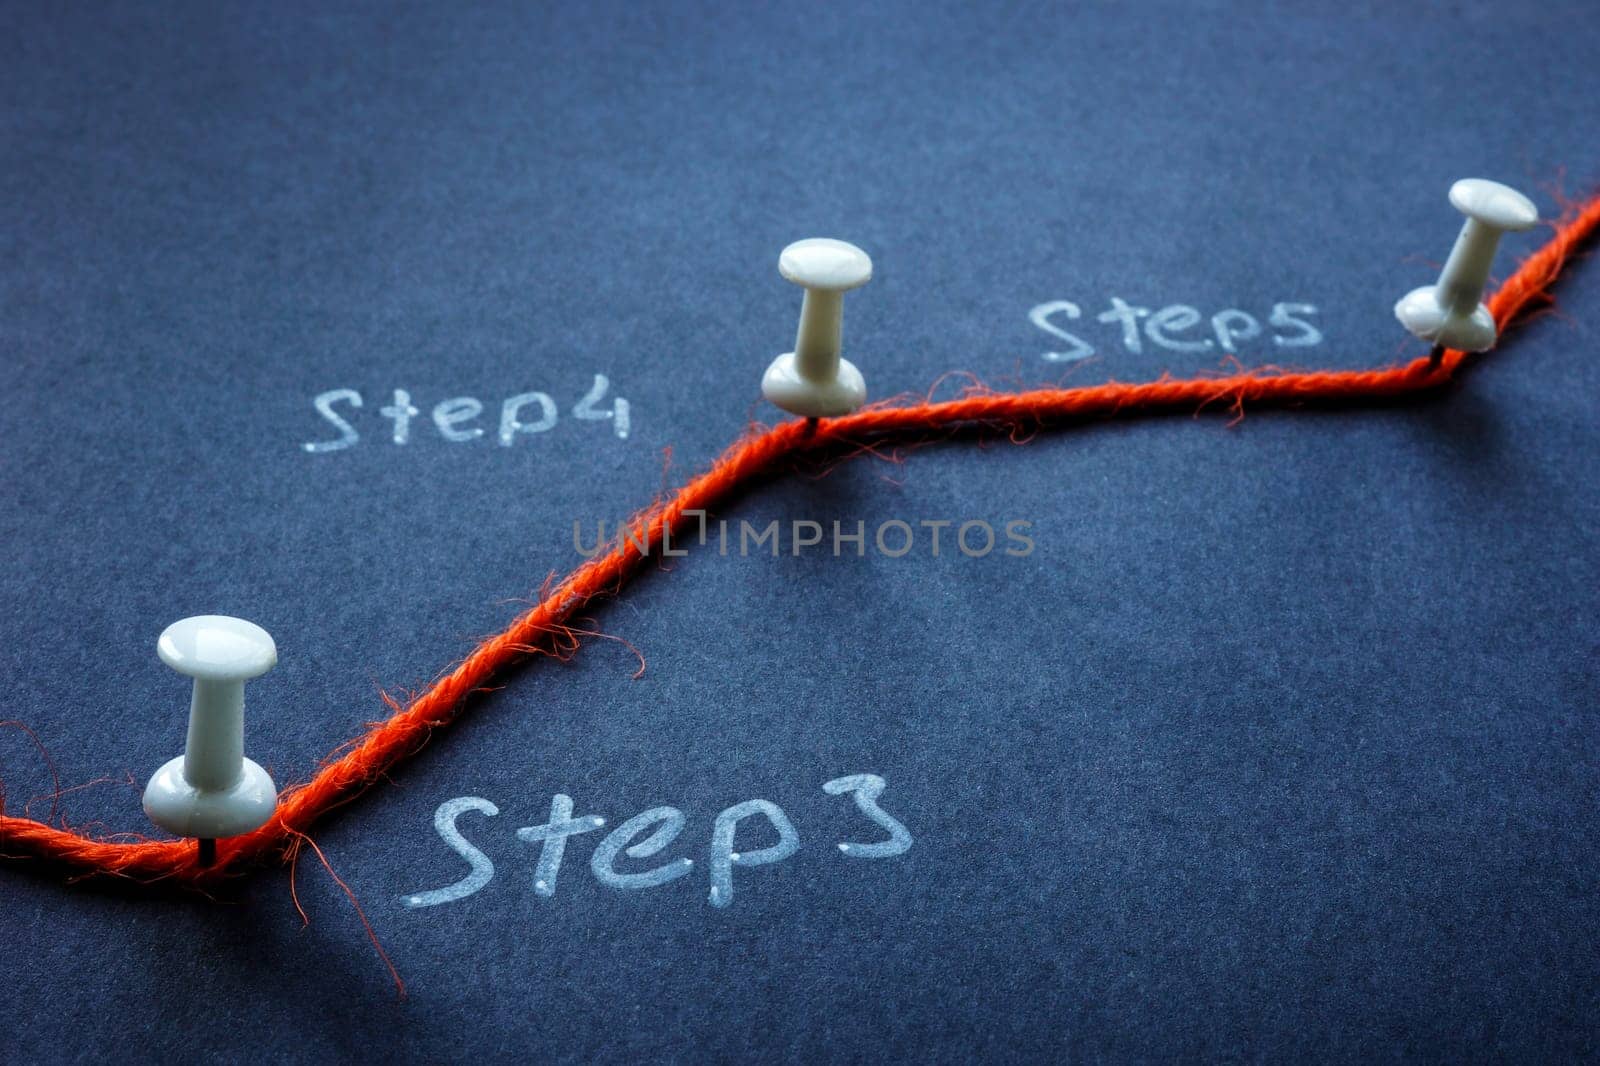 A stretched thread with pins indicating stages of a task or process. by designer491